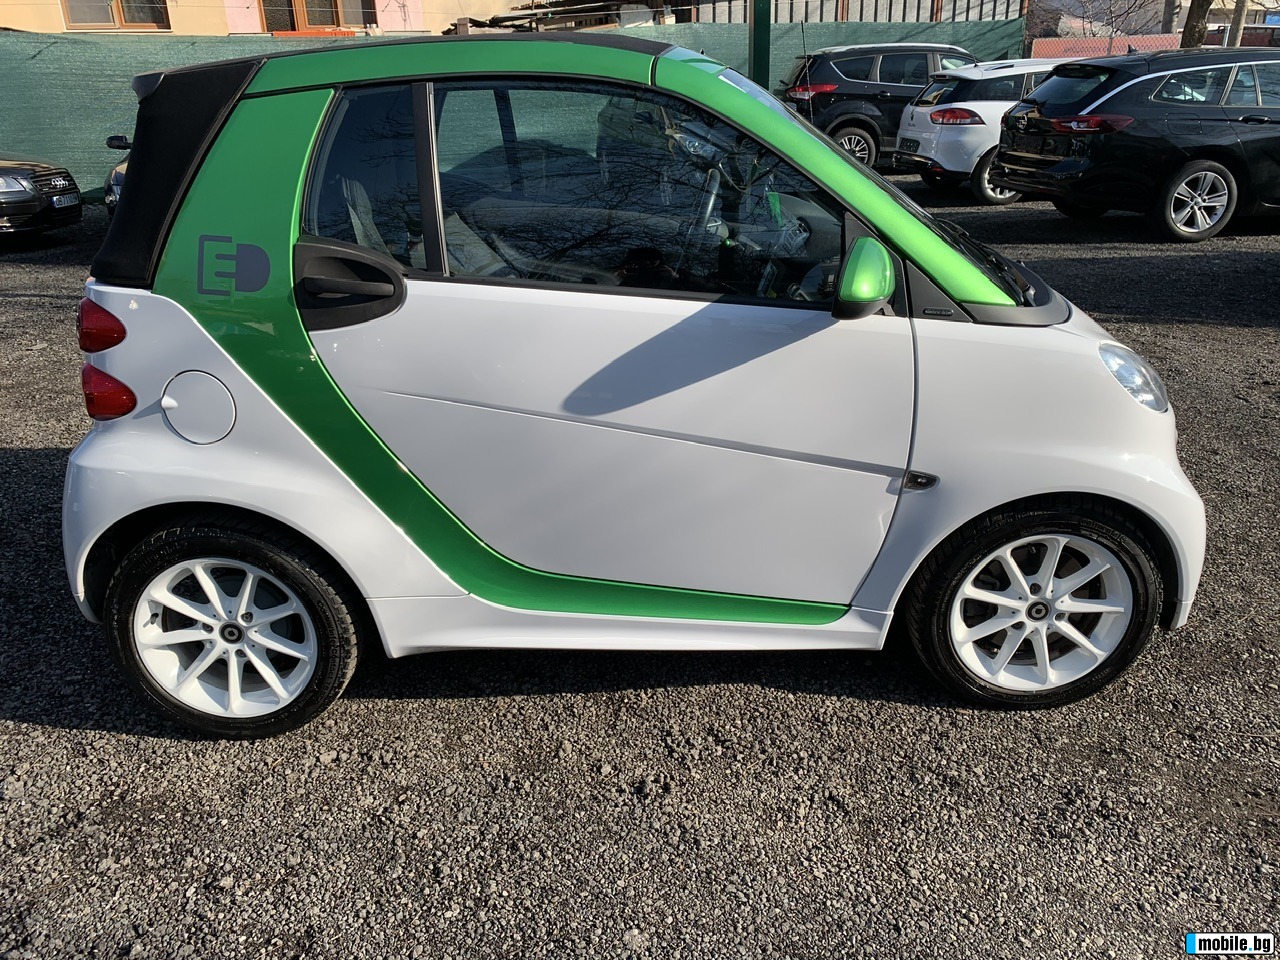 Smart Fortwo ELECTRIC DRIVE*35kW*26000.*.! | Mobile.bg   4